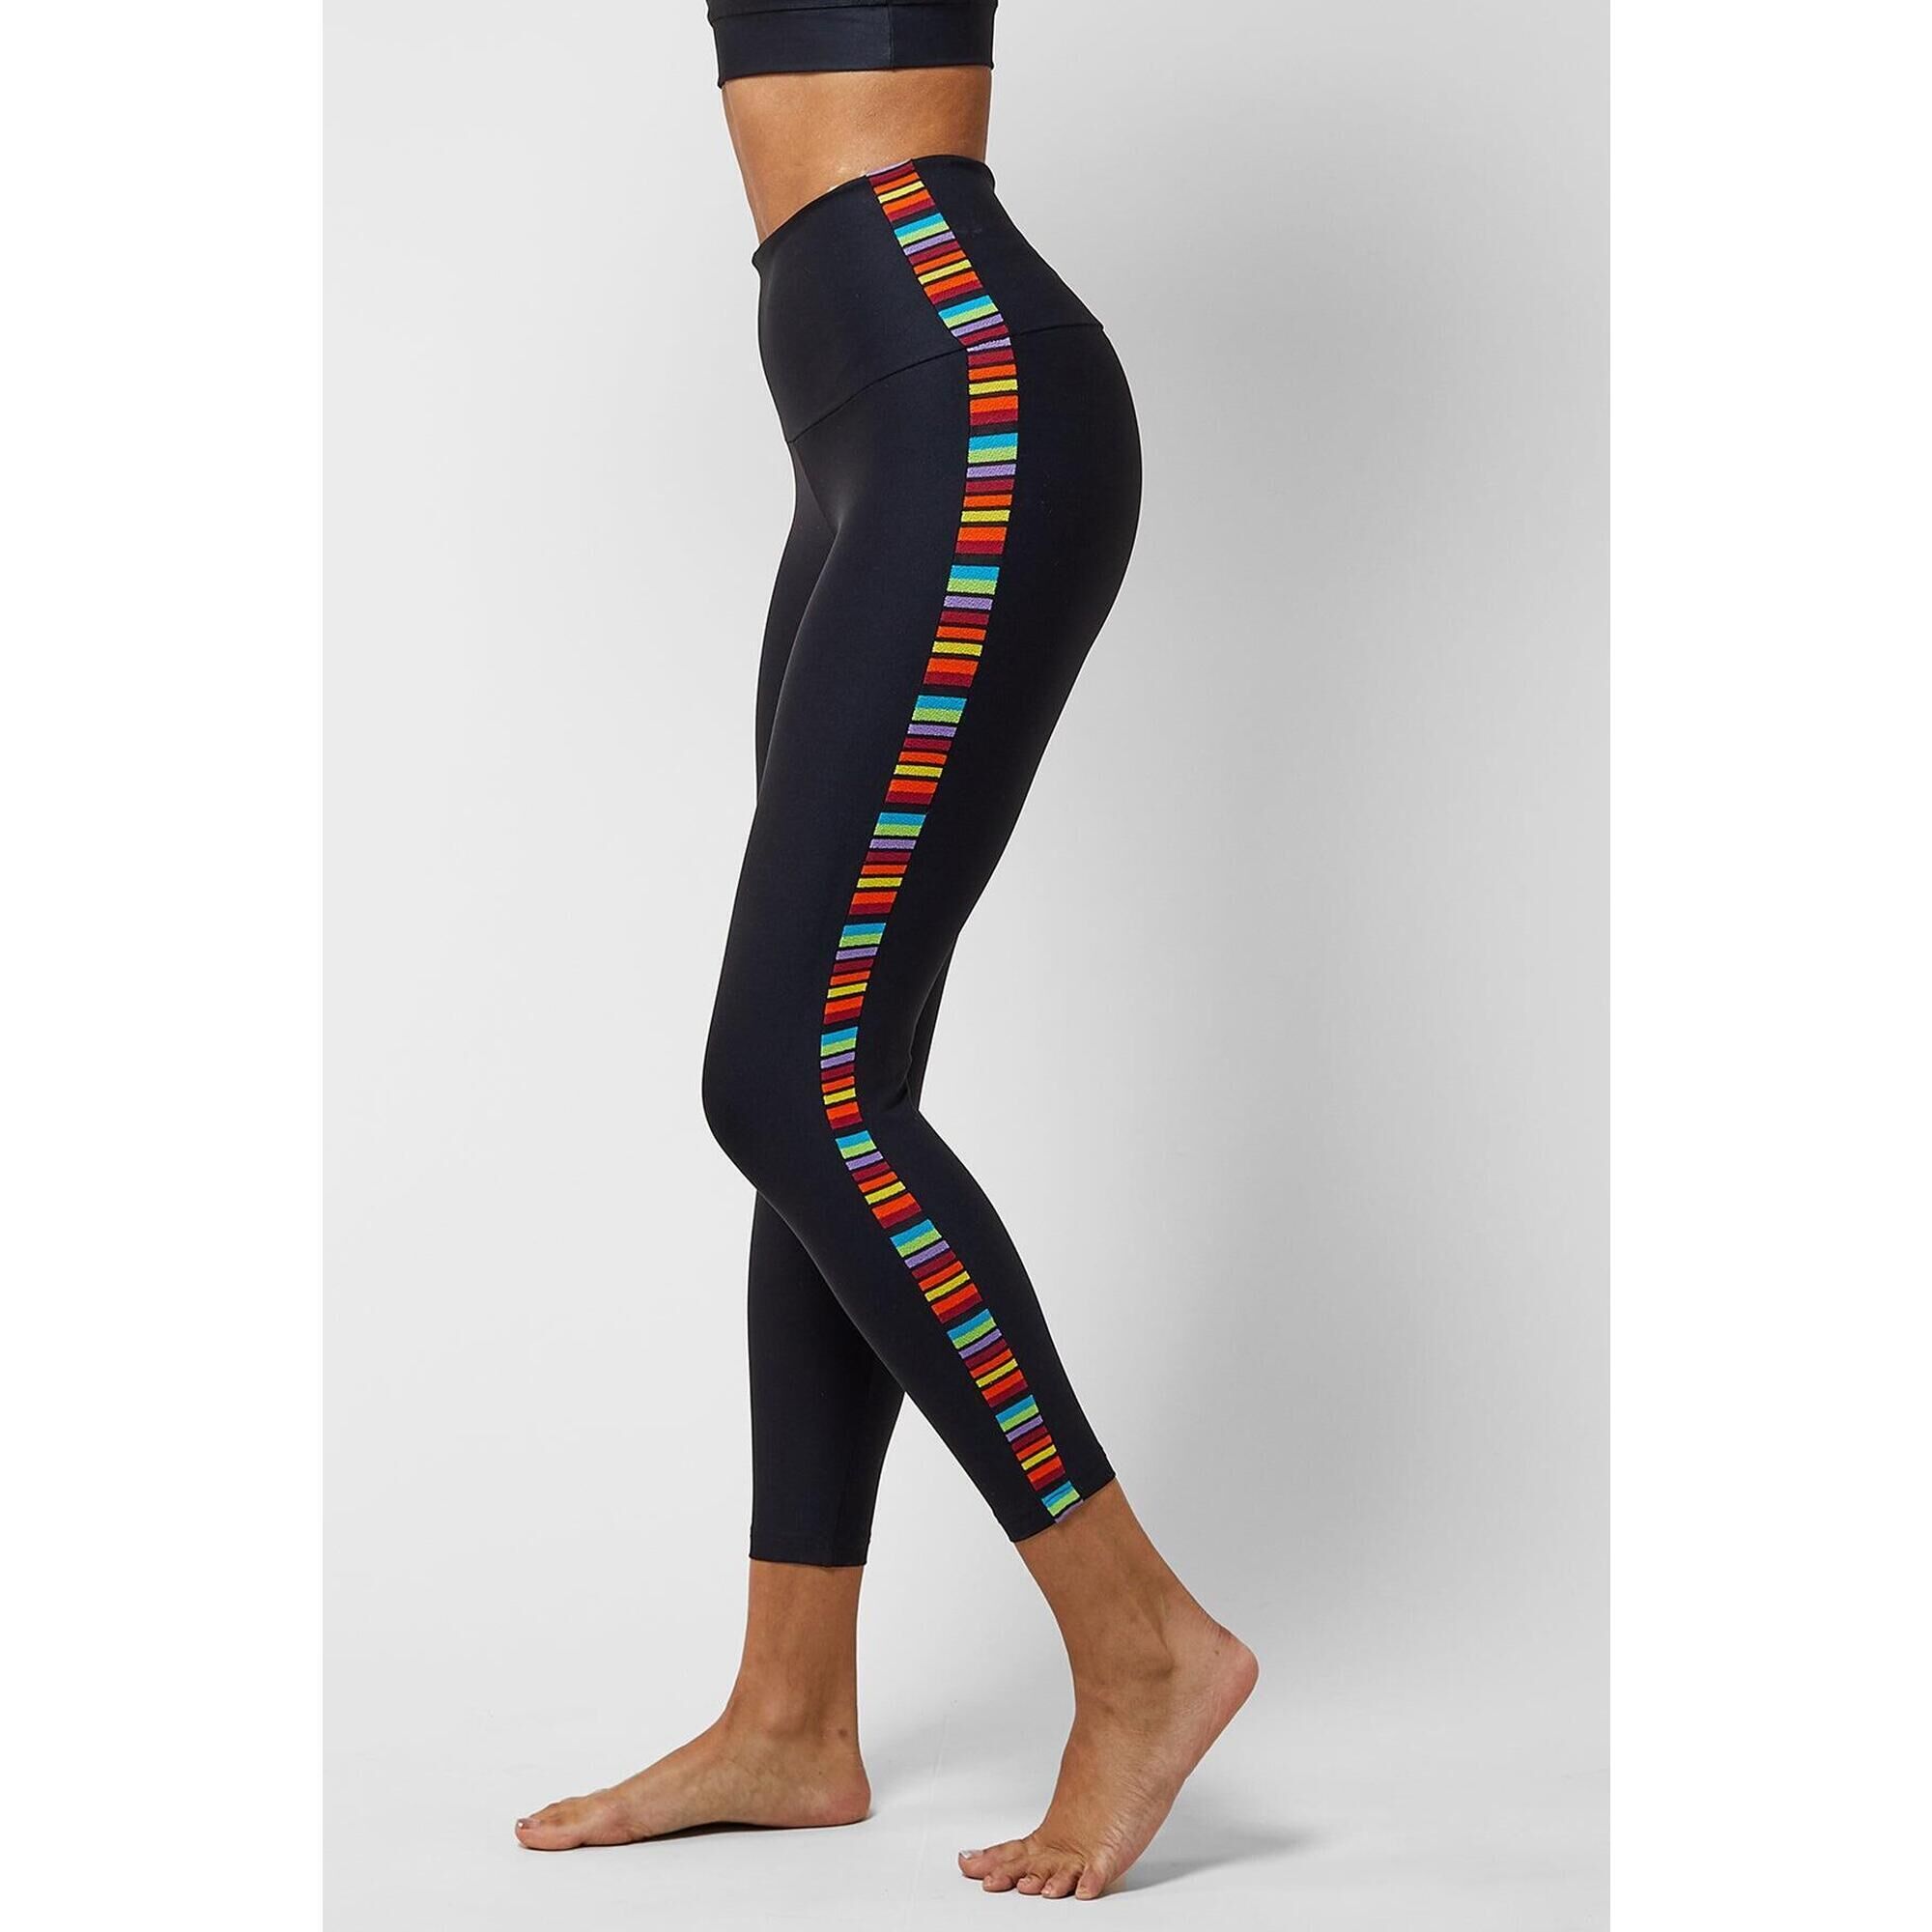 Extra Strong Compression Tummy Control Running/Sport Leggings